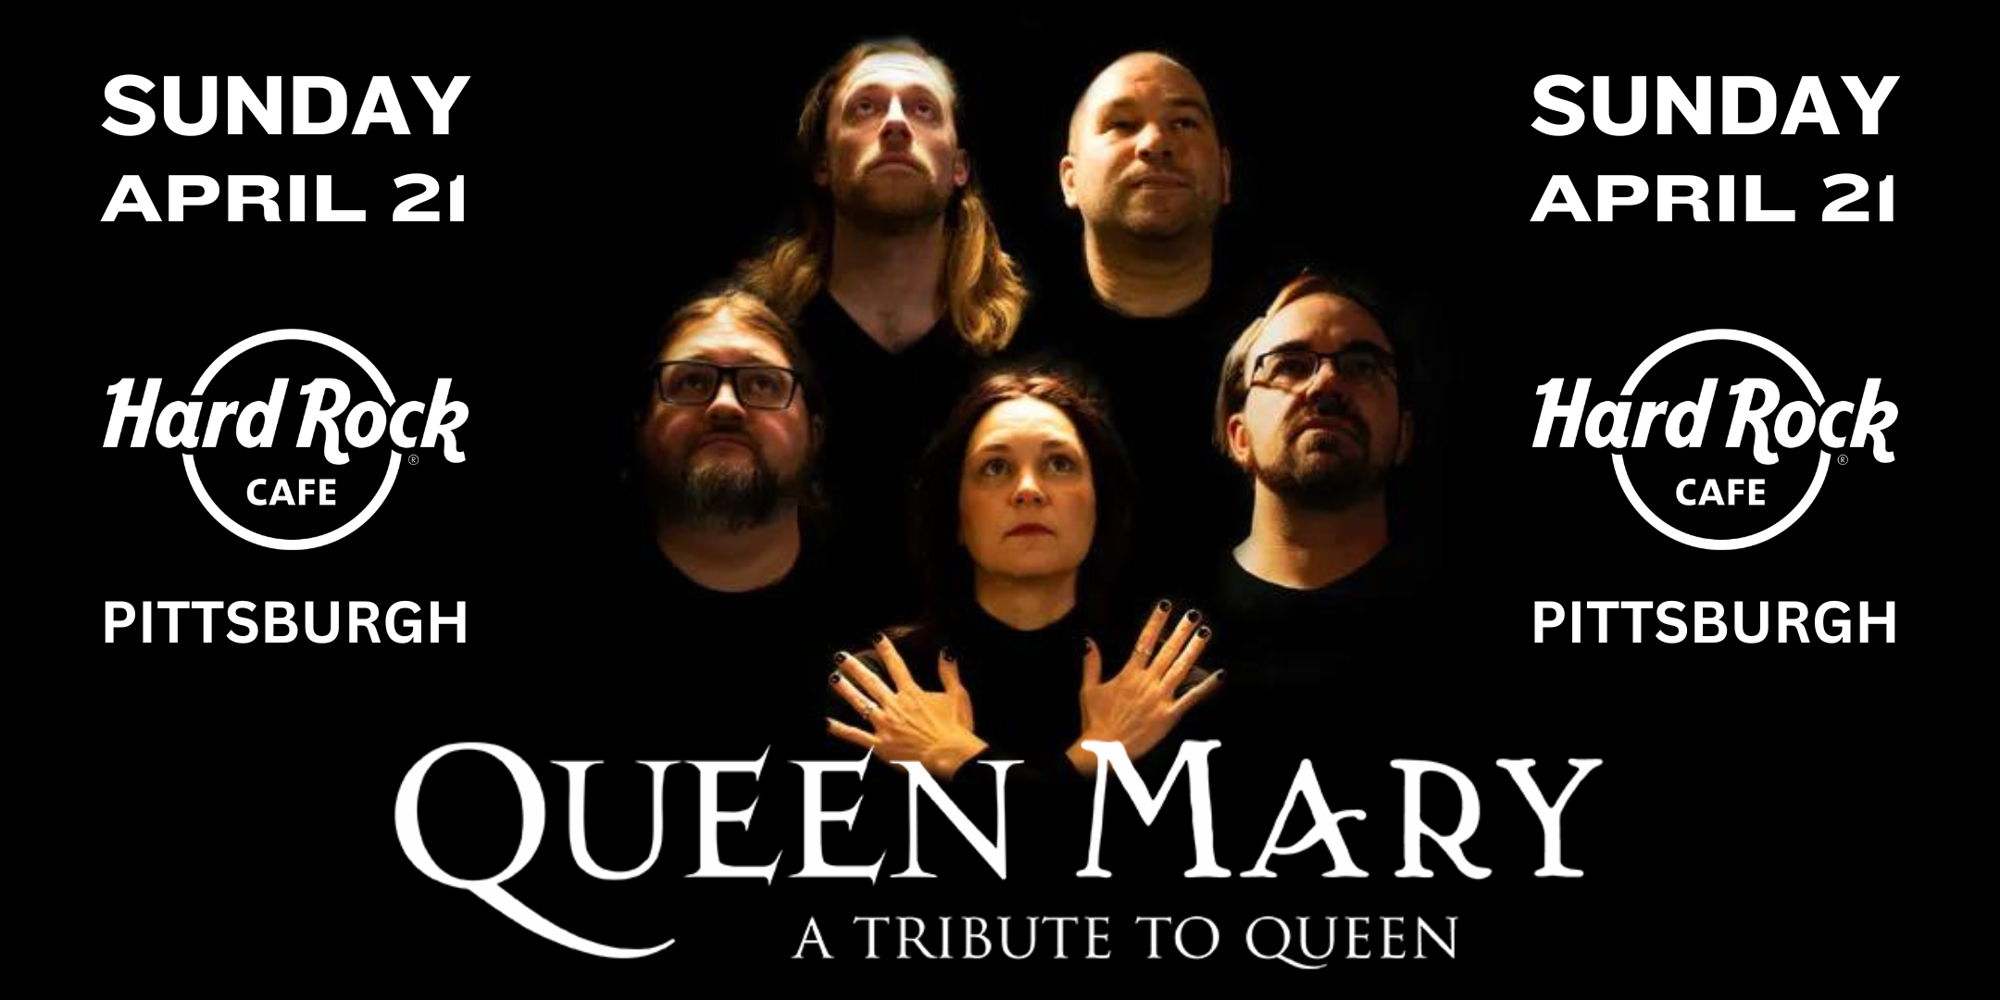 Queen Mary (Tribute to Queen) promotional image